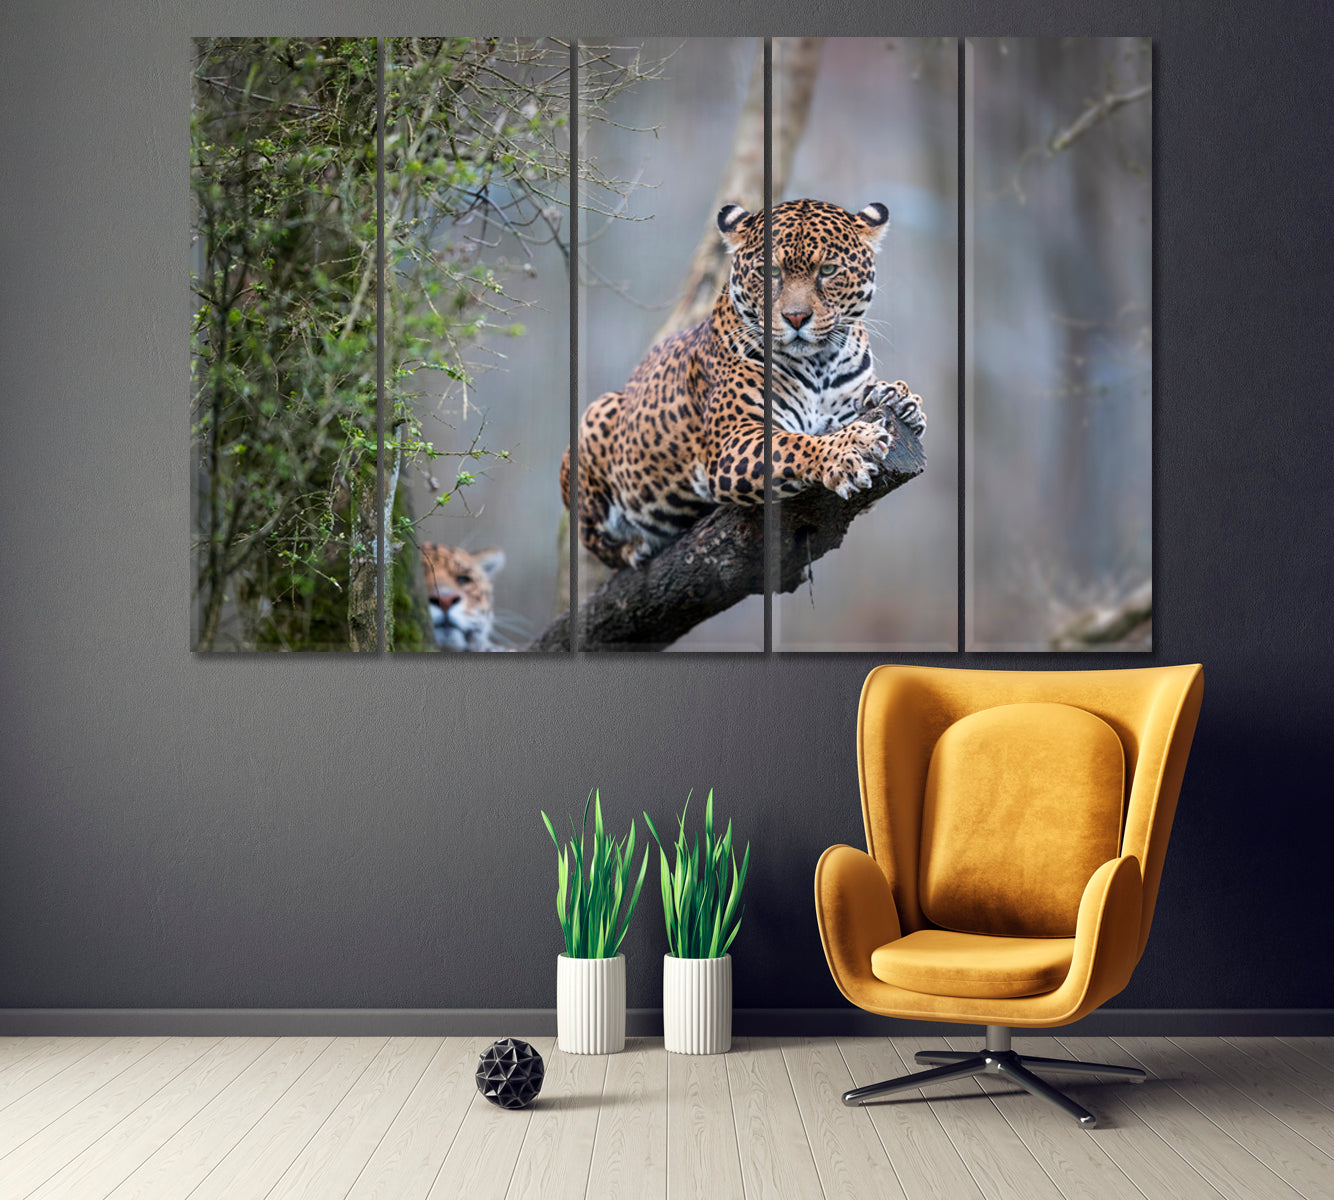 Angry Jaguar Canvas Print ArtLexy 5 Panels 36"x24" inches 